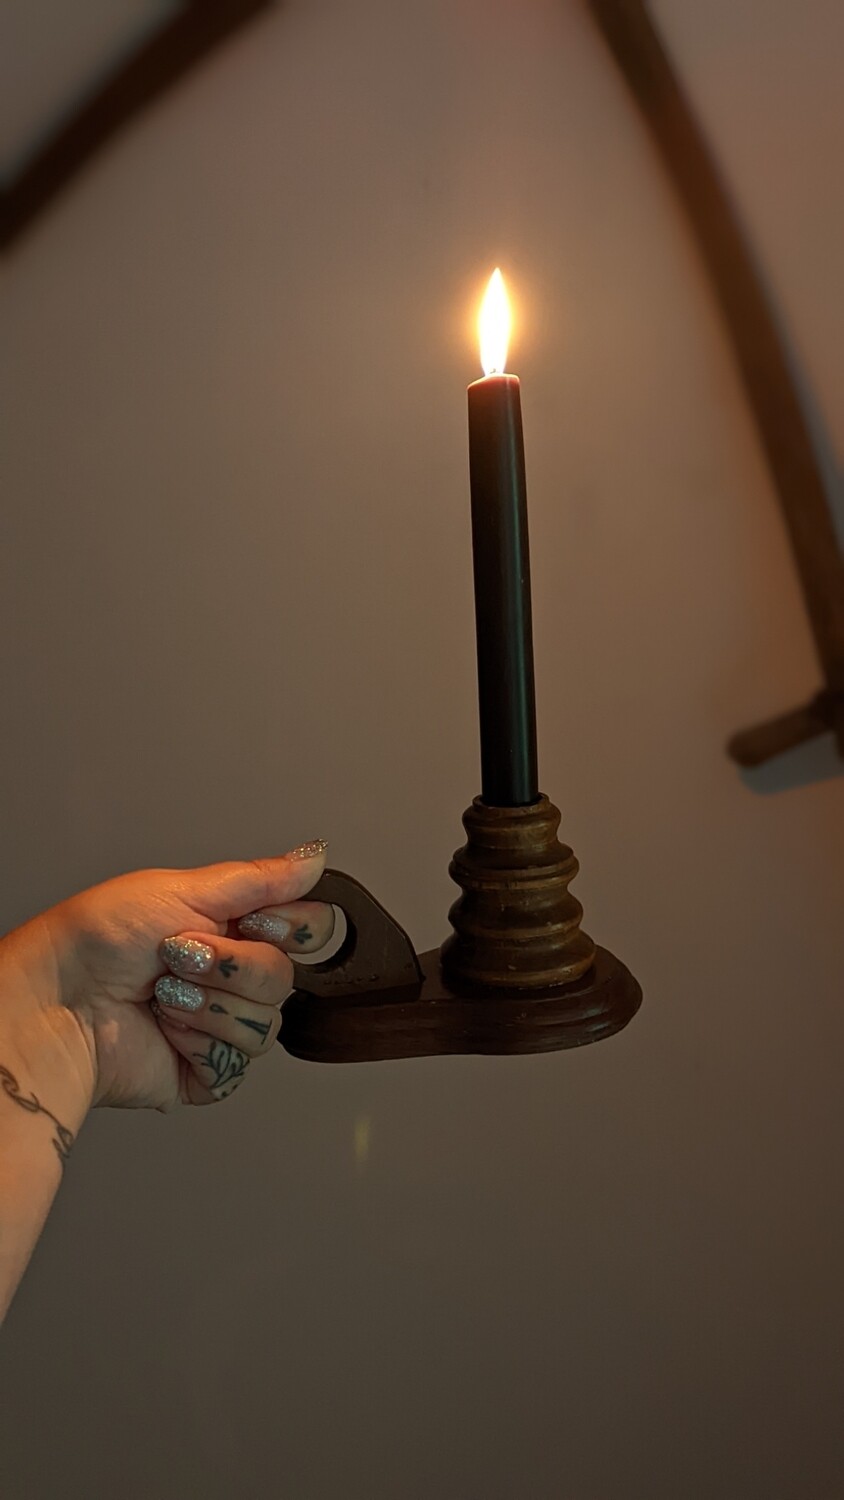 wooden candle holder